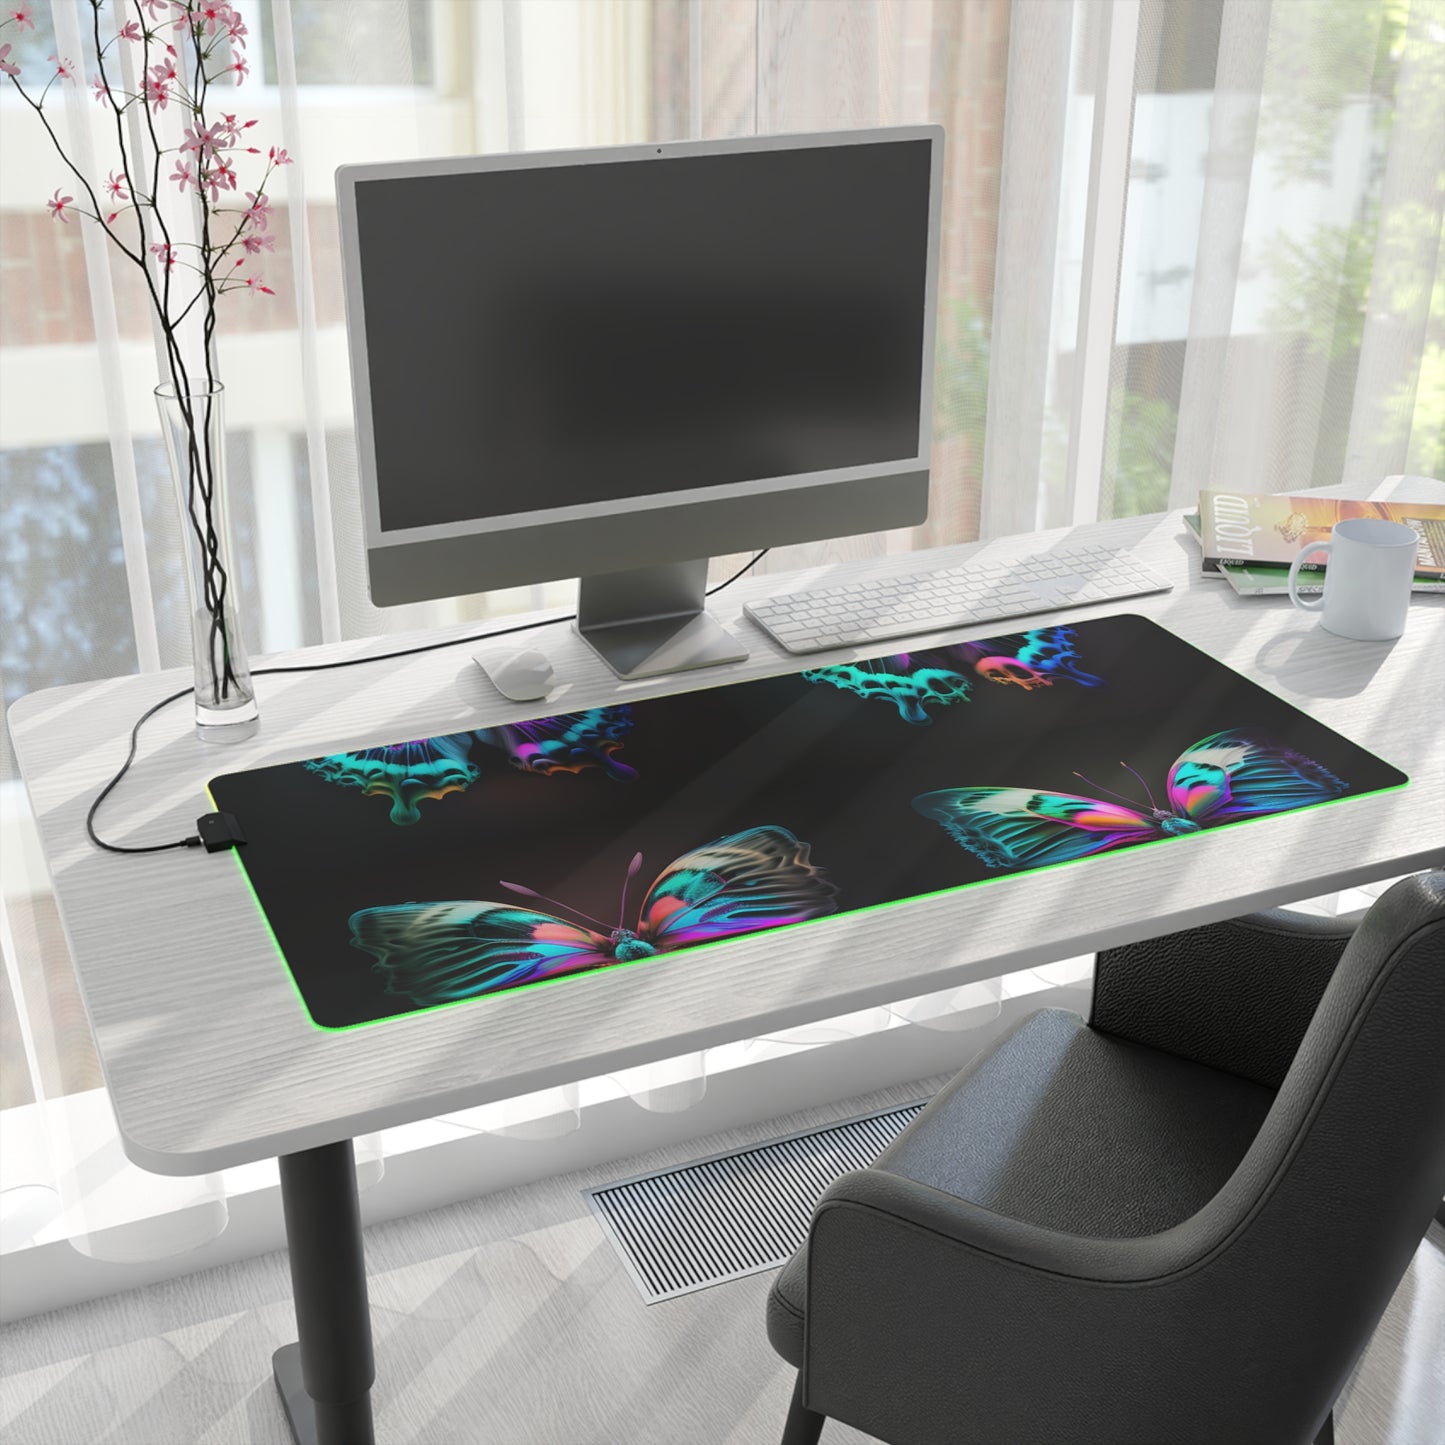 LED Gaming Mouse Pad Neon Butterfly Fusion 5